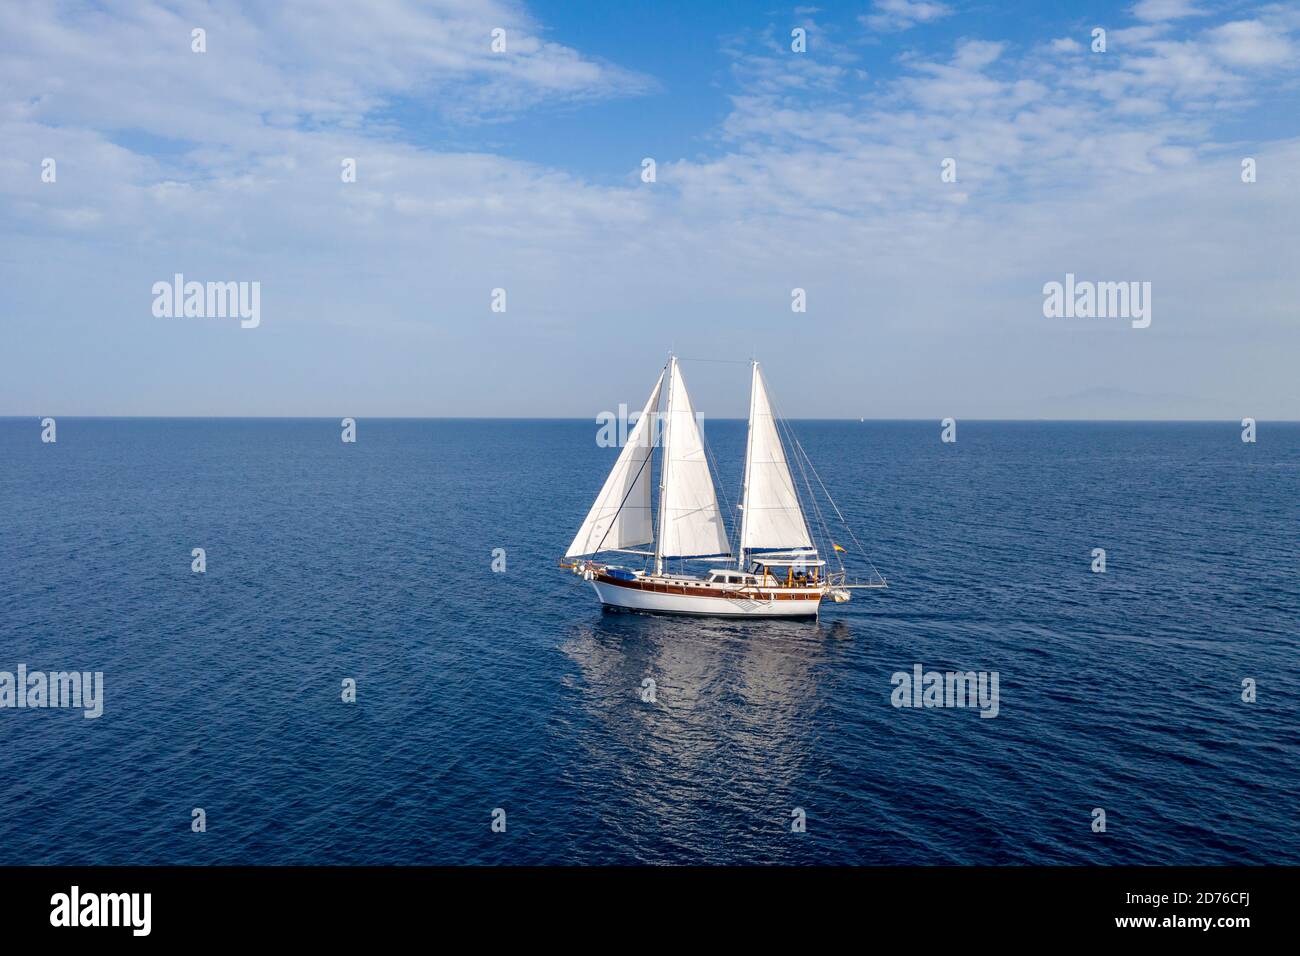 Download Sailing Ship Yacht Luxury Boat With White Sails In The Open Sea Wooden Vintage Sailboat Cloudy Blue Sky Background Aegean Sea Greece Stock Photo Alamy